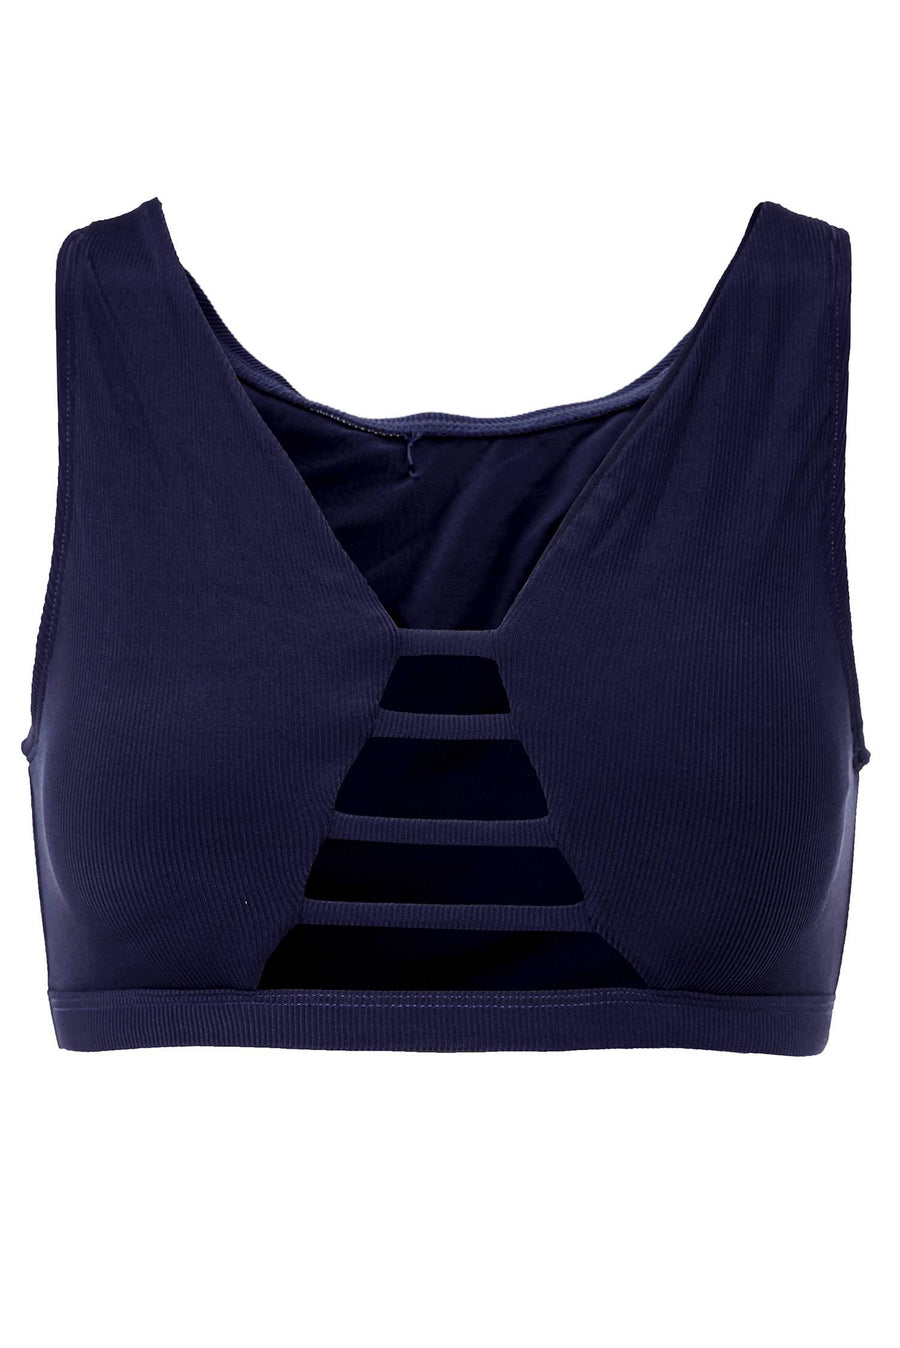 The Valley Top - Ribbed Navy Top